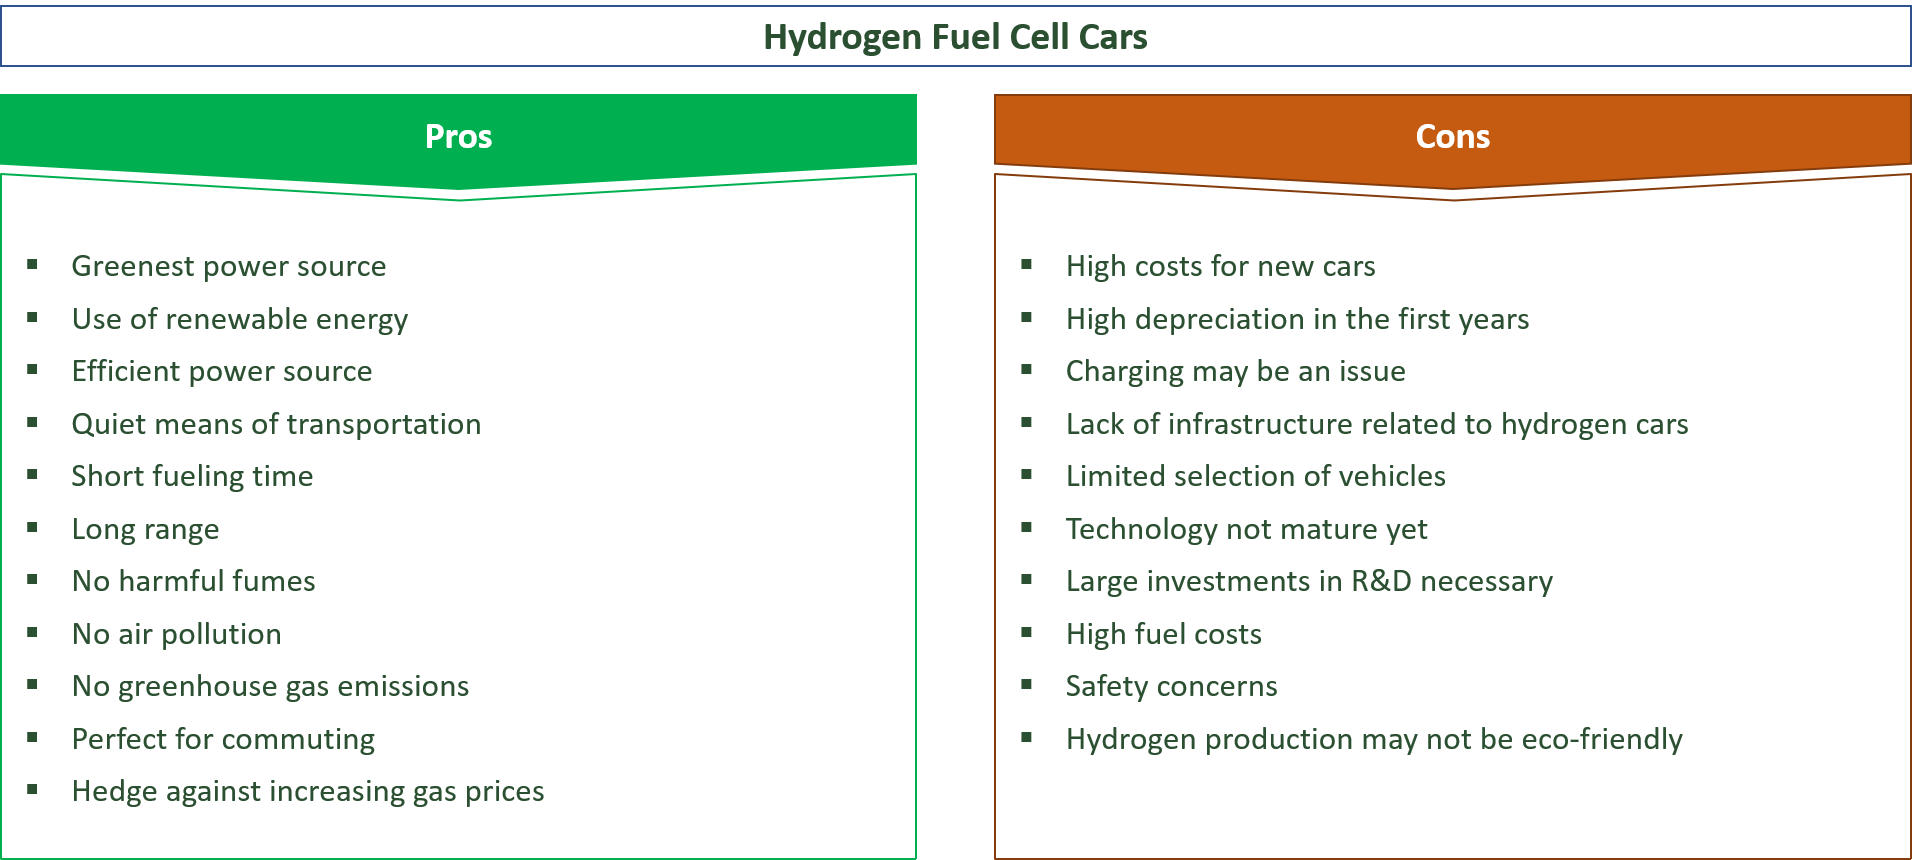 the advantages and downsides of hydrogen fuel cell cars